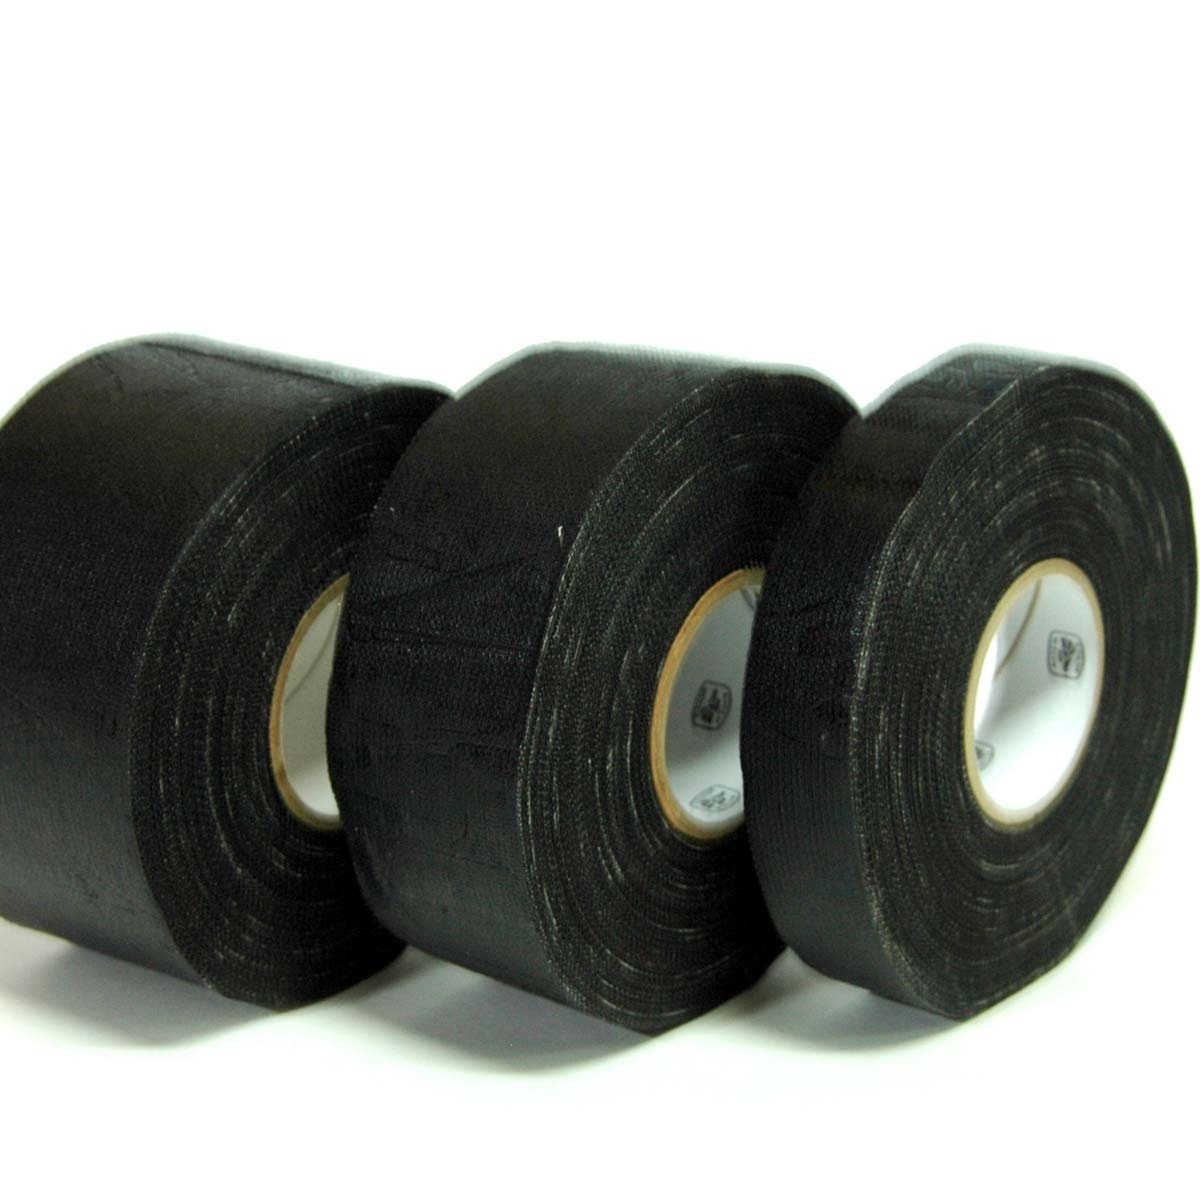 CFT-45 - 15 Mil Black Cloth Friction Tape - Cloth Tape